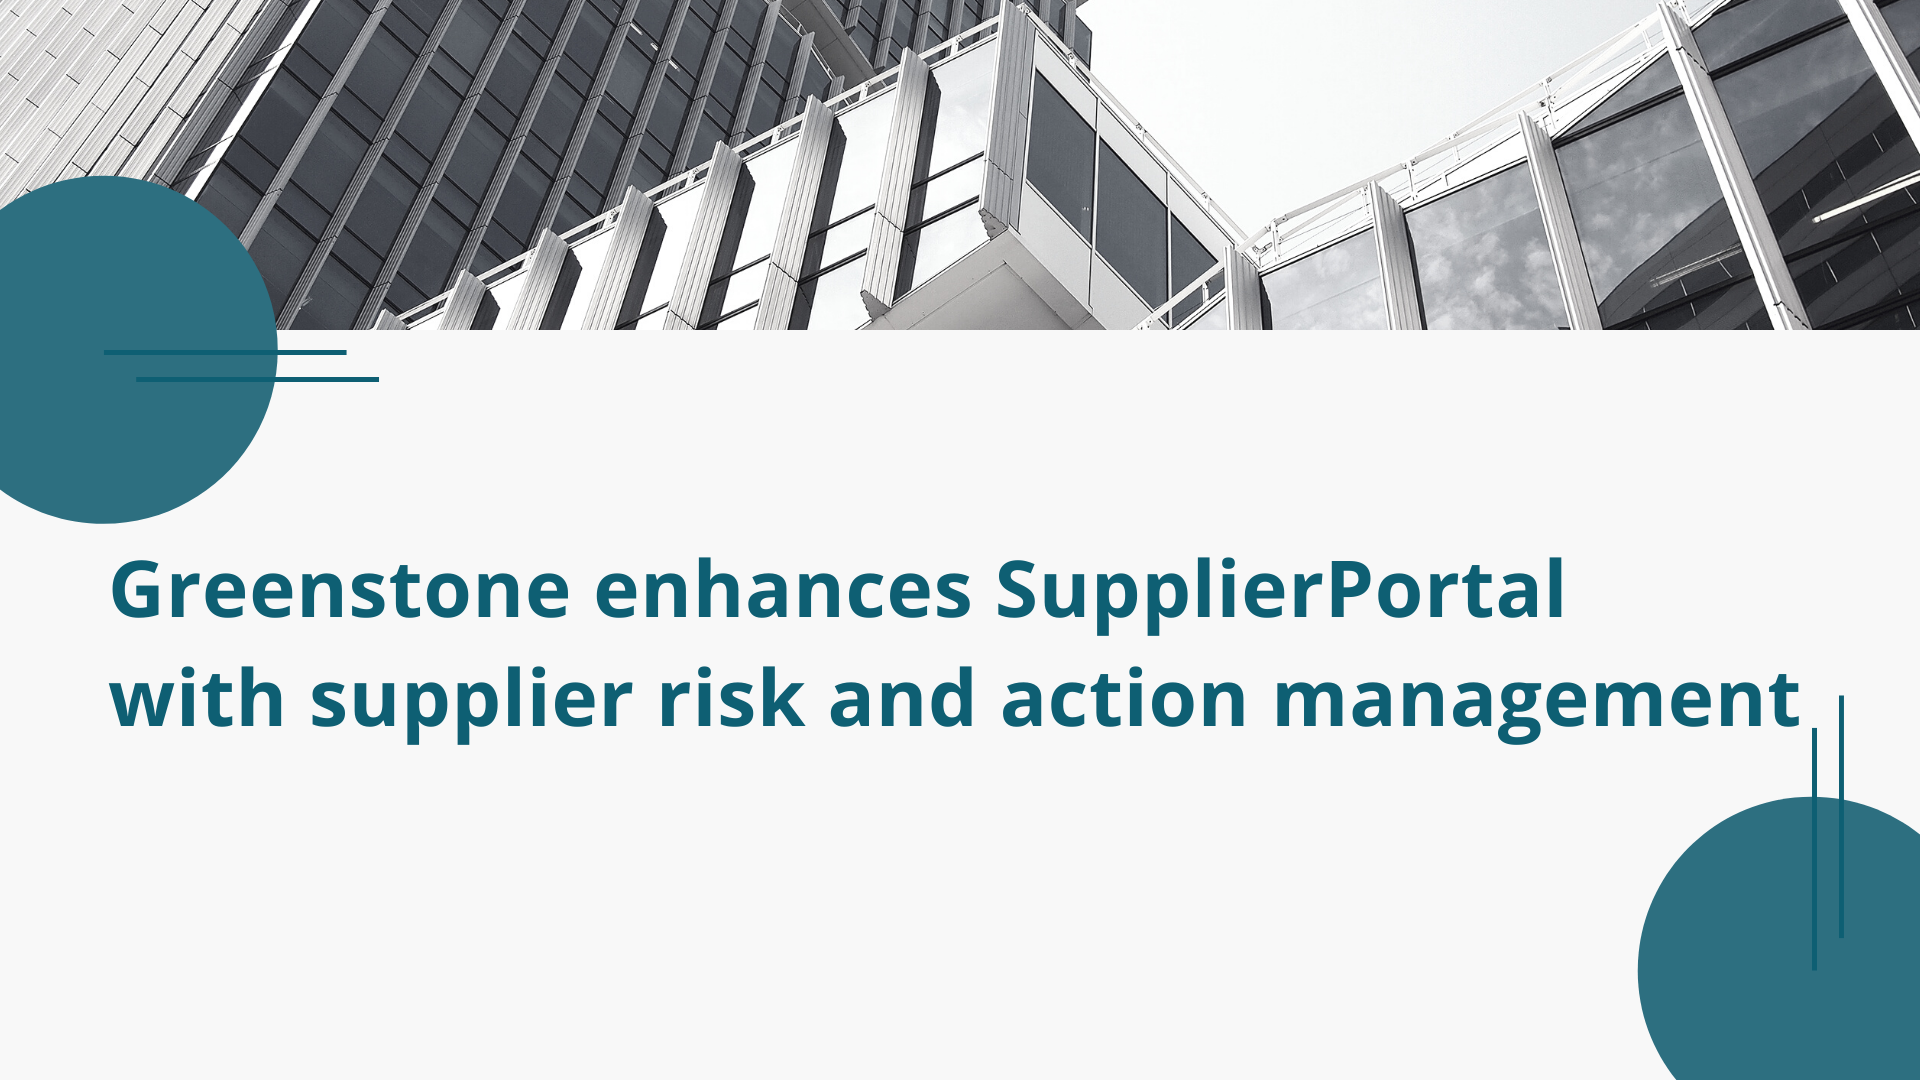 Greenstone enhances SupplierPortal with supplier risk and action management